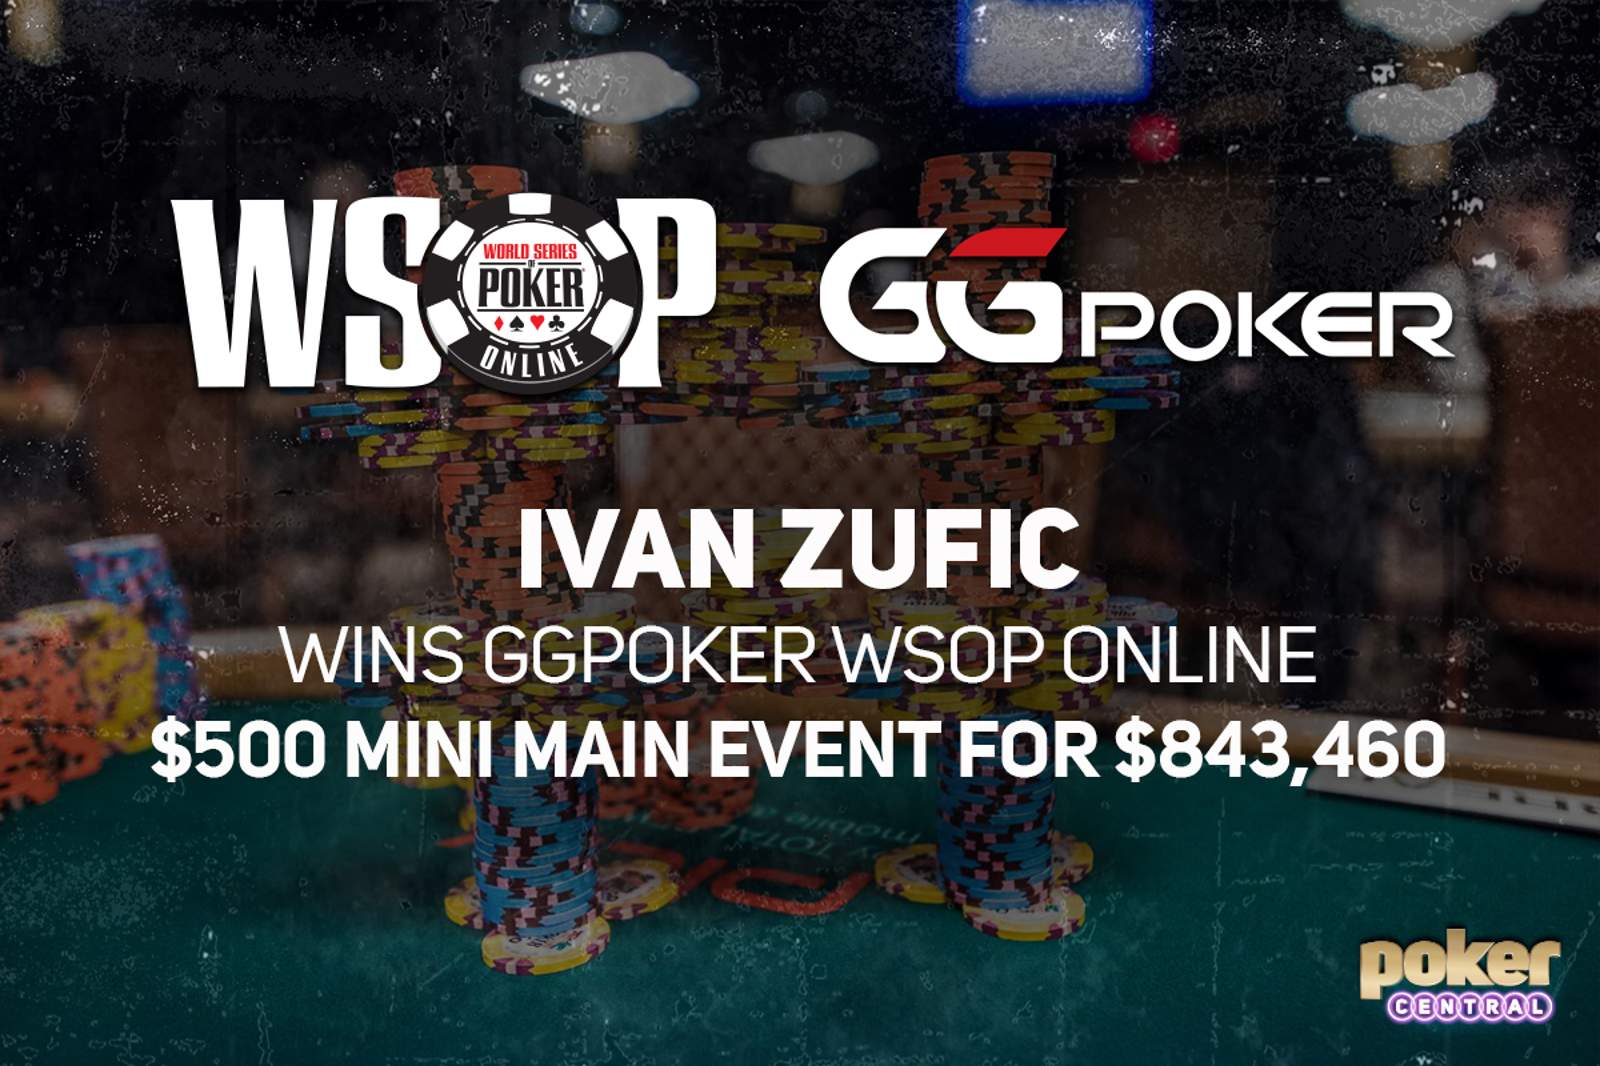 Four More Bracelets Awarded on GGPoker WSOP Online - Ivan Zufic Wins $500 Mini Main Event for $843,460